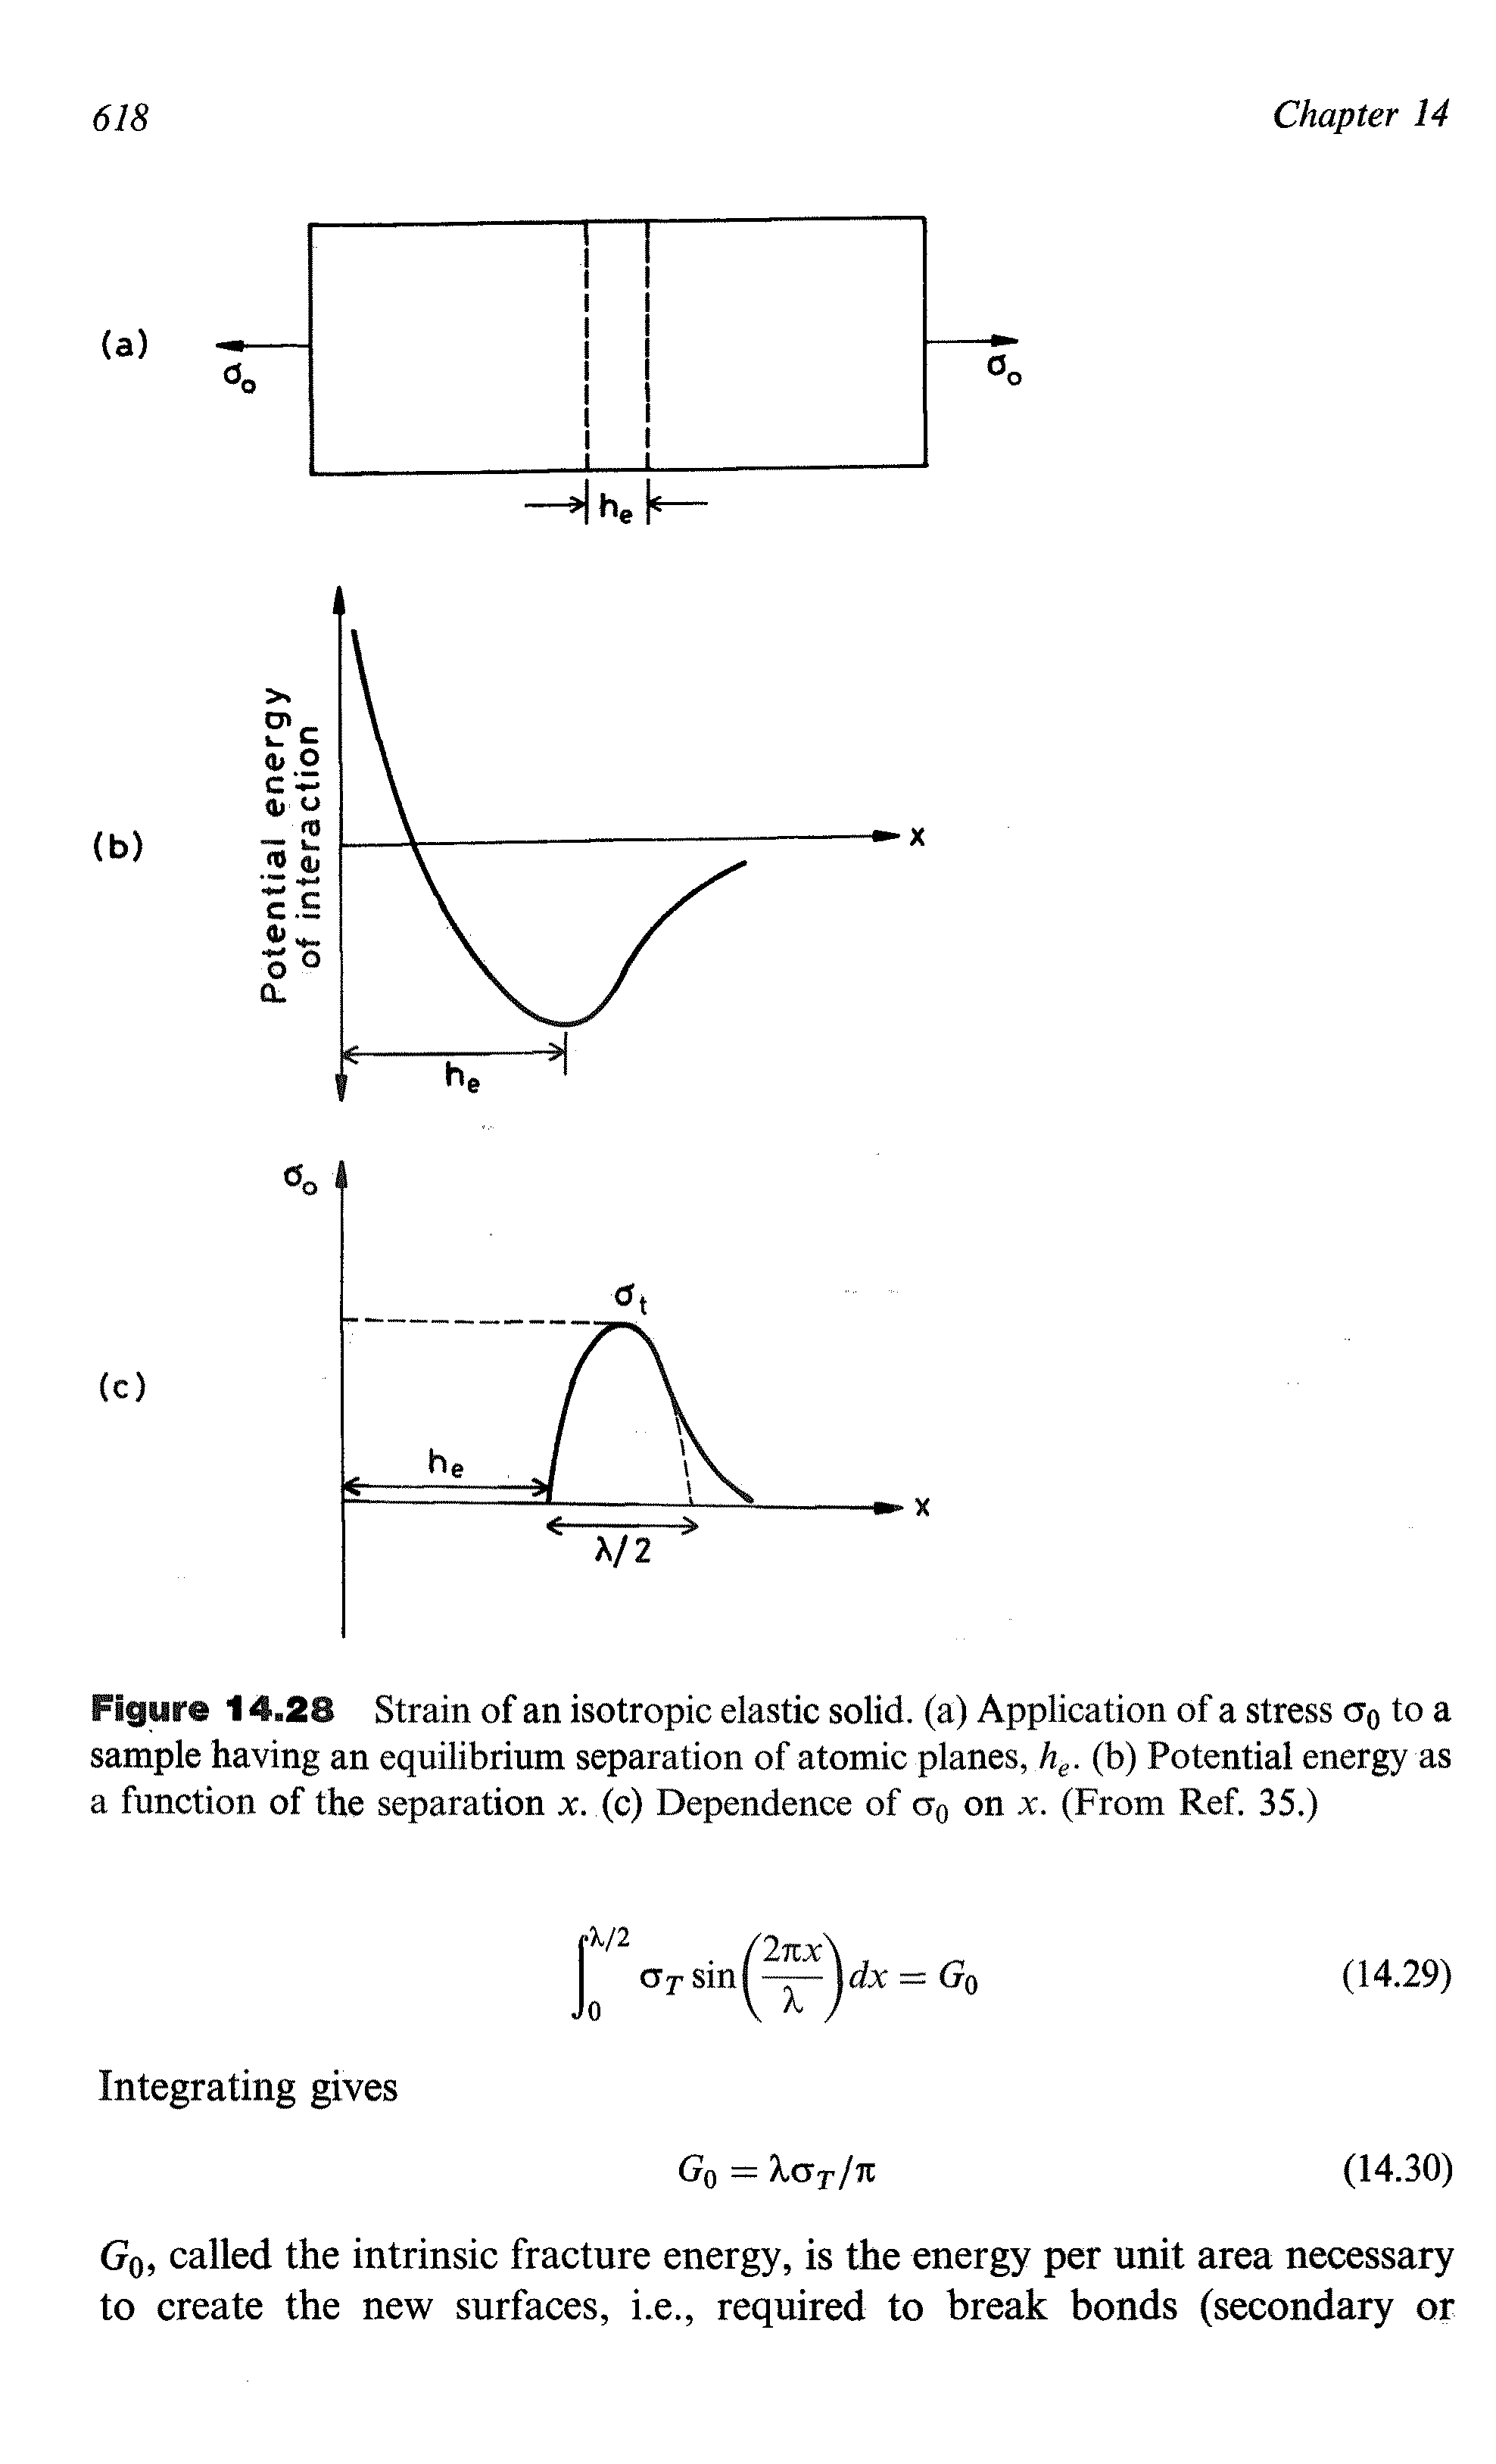 Figure 14.28 Strain of an isotropic elastic solid, (a) Application of a stress Gq to a sample having an equilibrium separation of atomic planes, h. (b) Potential energy as a function of the separation x. (c) Dependence of cro on x. (From Ref. 35.)...